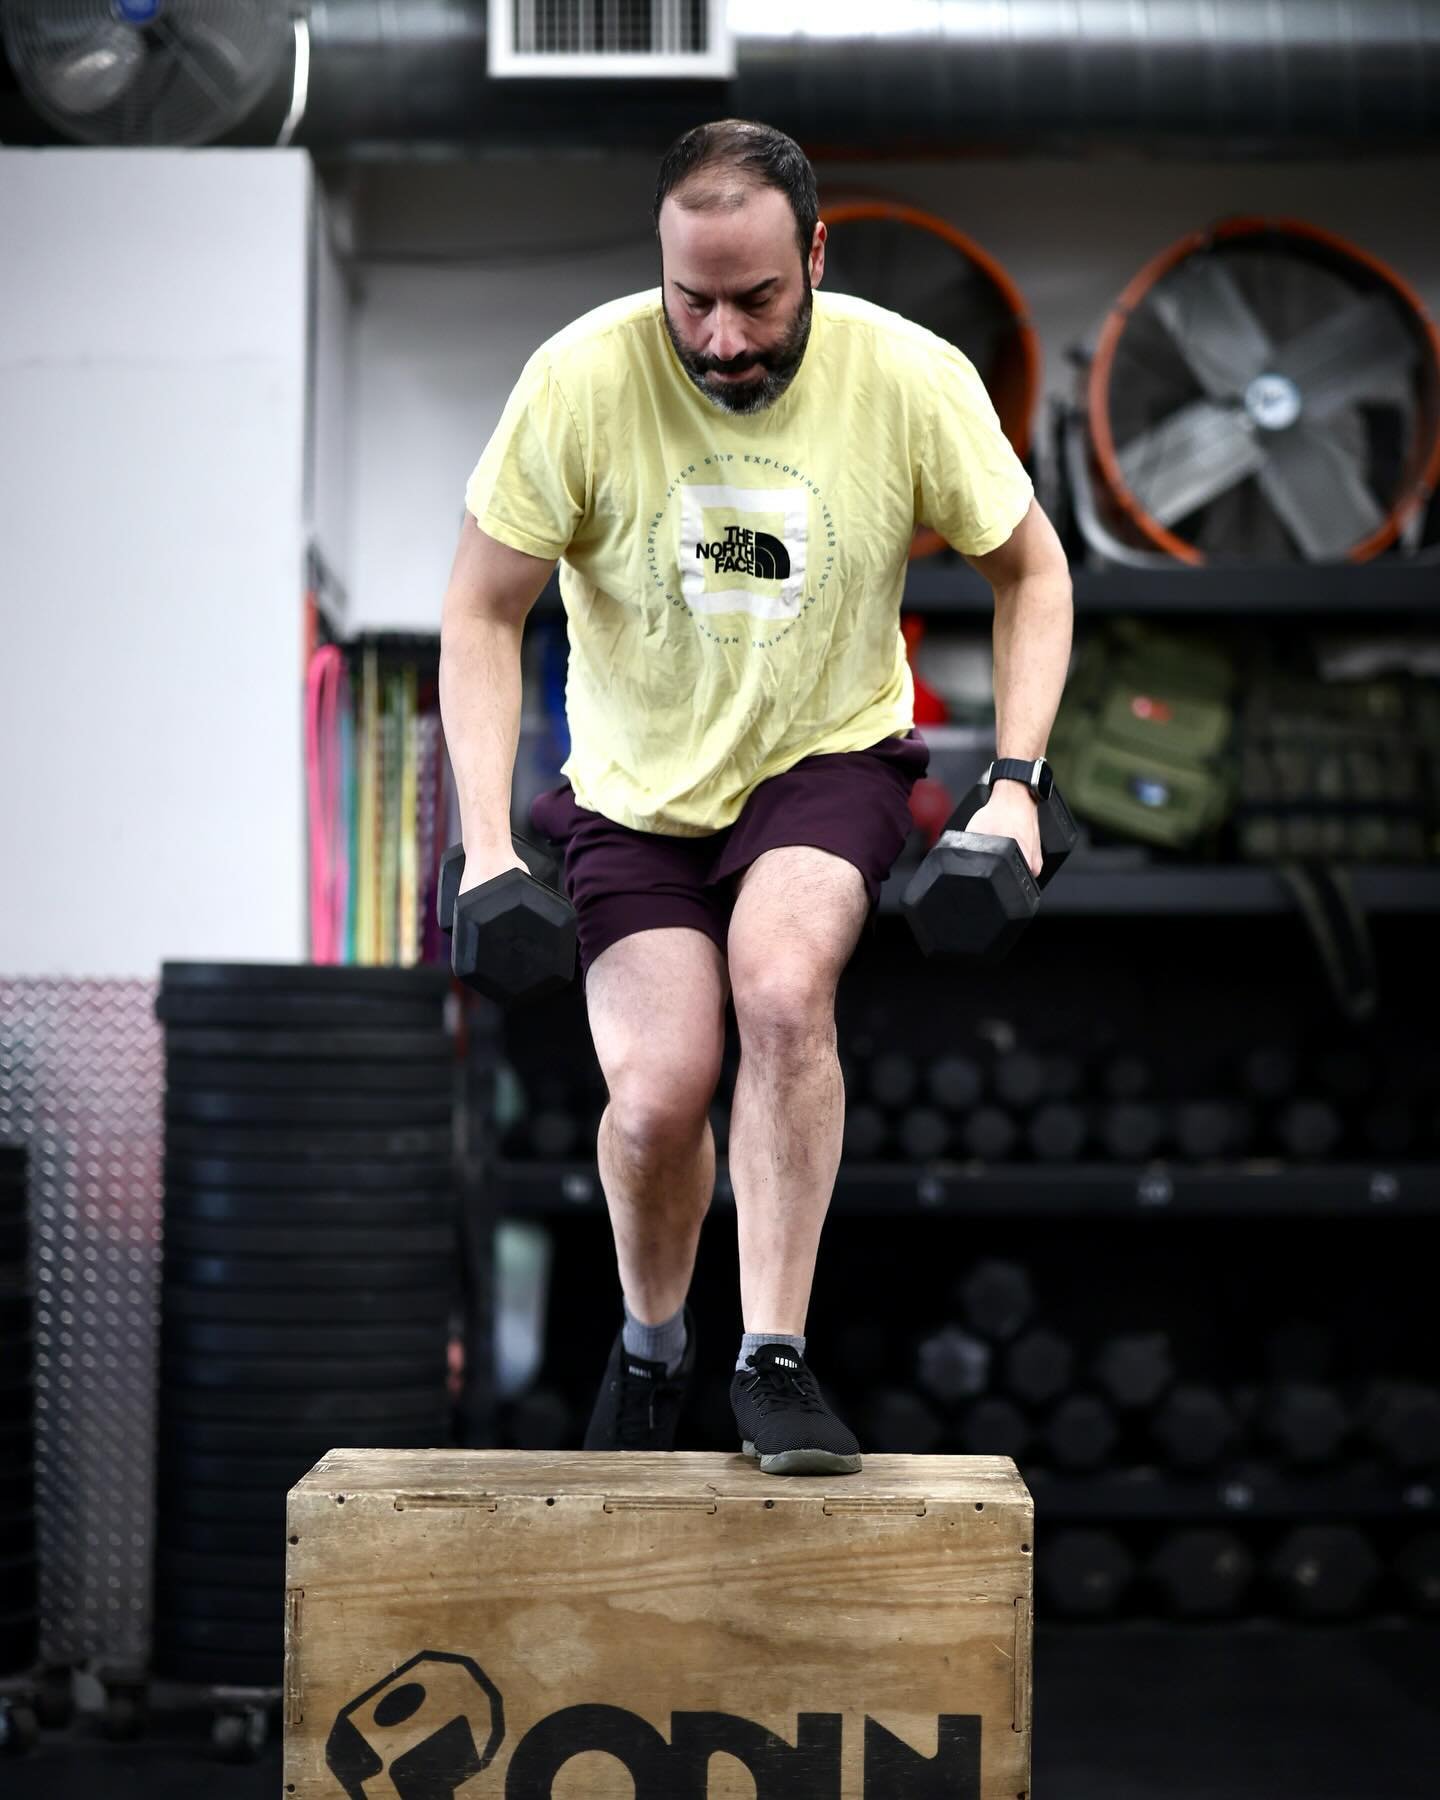 This is not just a gym&hellip;&hellip;this is a community of people who have decided easy will no longer suffice.  #crossfit #lifechangingfitness #cfsdstrong #blaskobuilt #hardworkearnsrespect #ifitdoesntchallengyouitdoesntchangeyou  #communityoverco